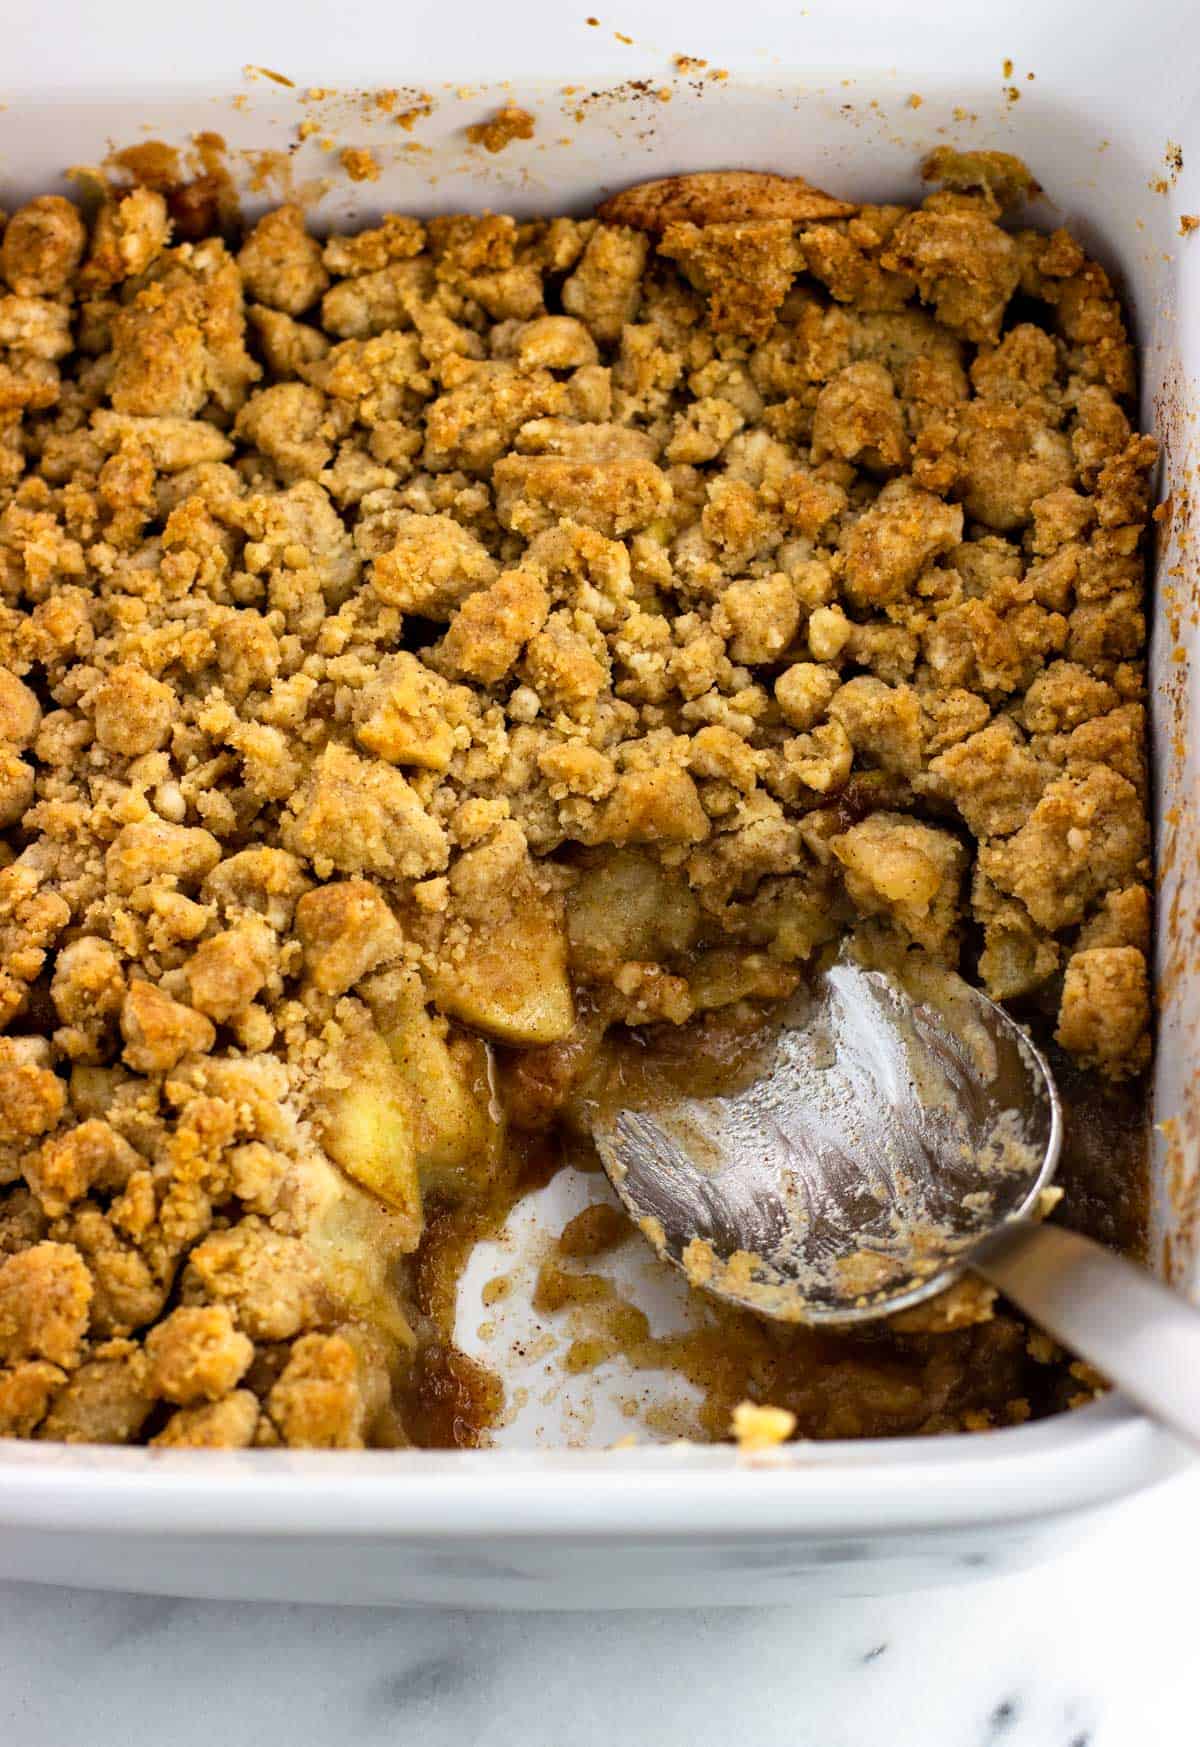 A baking dish of apple crumble with a serving spoon with a portion removed to show the layers.